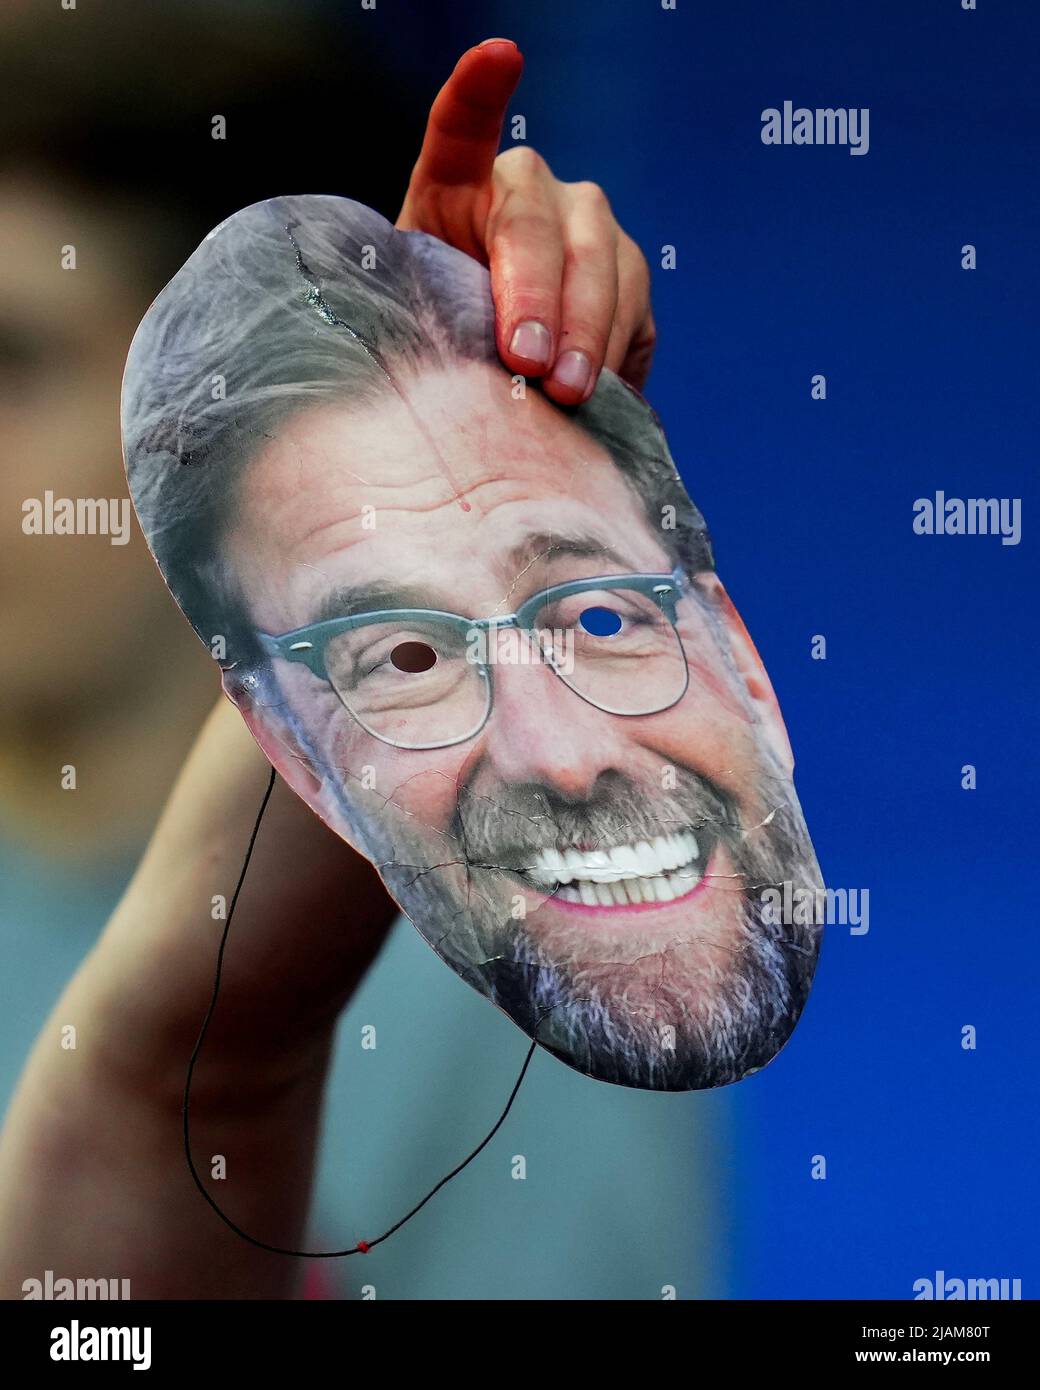 Jurgen Klopp’s mask during the UEFA Champions League Final match between Liverpool FC and Real Madrid played at Stade de France on May 28, 2022 in Paris, France. (Photo by Magma) Stock Photo